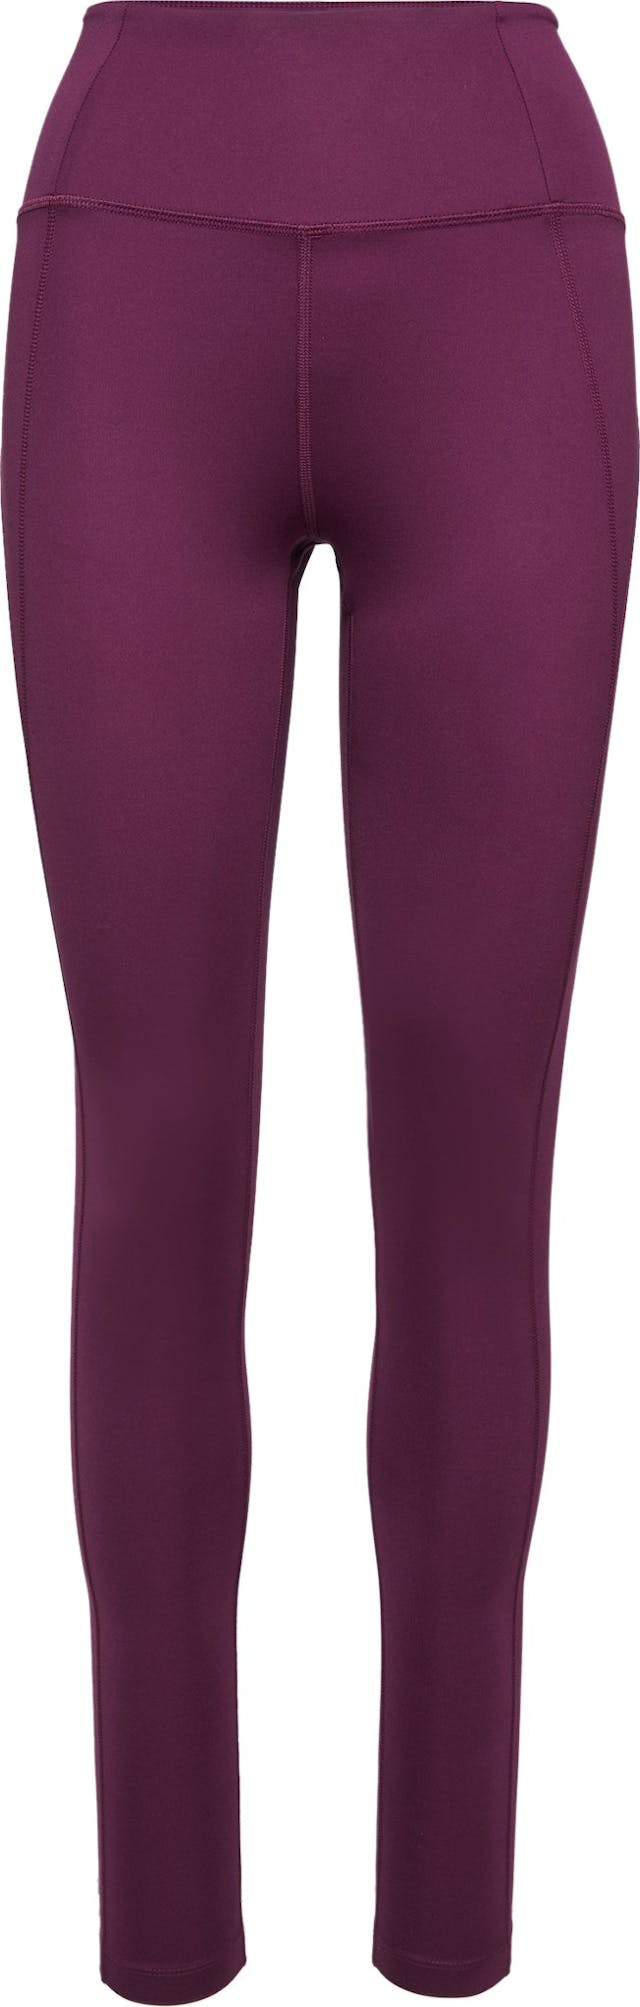 Product image for Earth Compressive High-Rise Legging - Women's